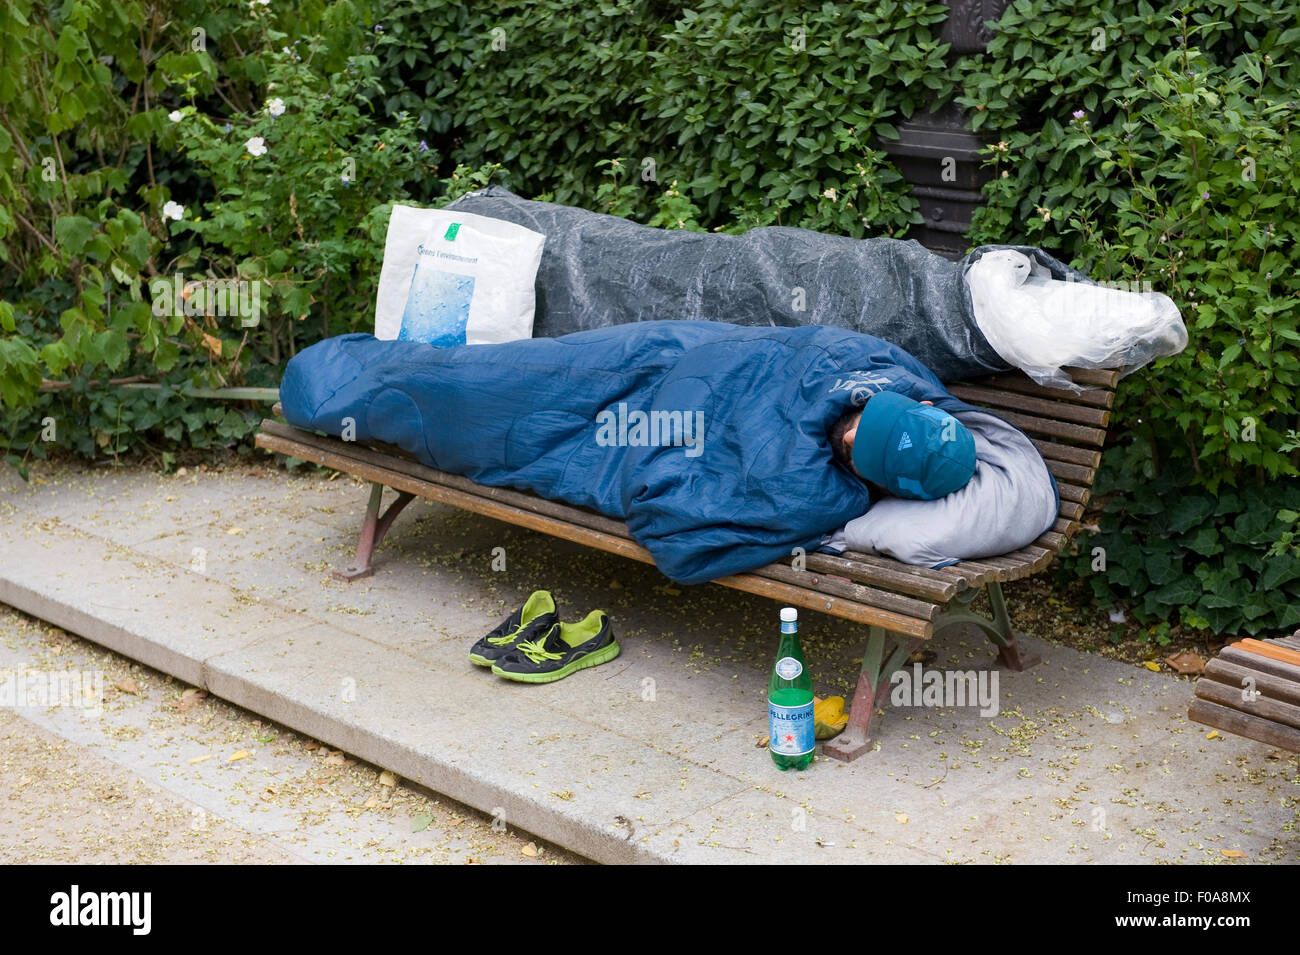 PARIS, FRANCE - JULY 27, 2015: A homeless man is sleeping on a bench in a park in Paris in France Stock Photo